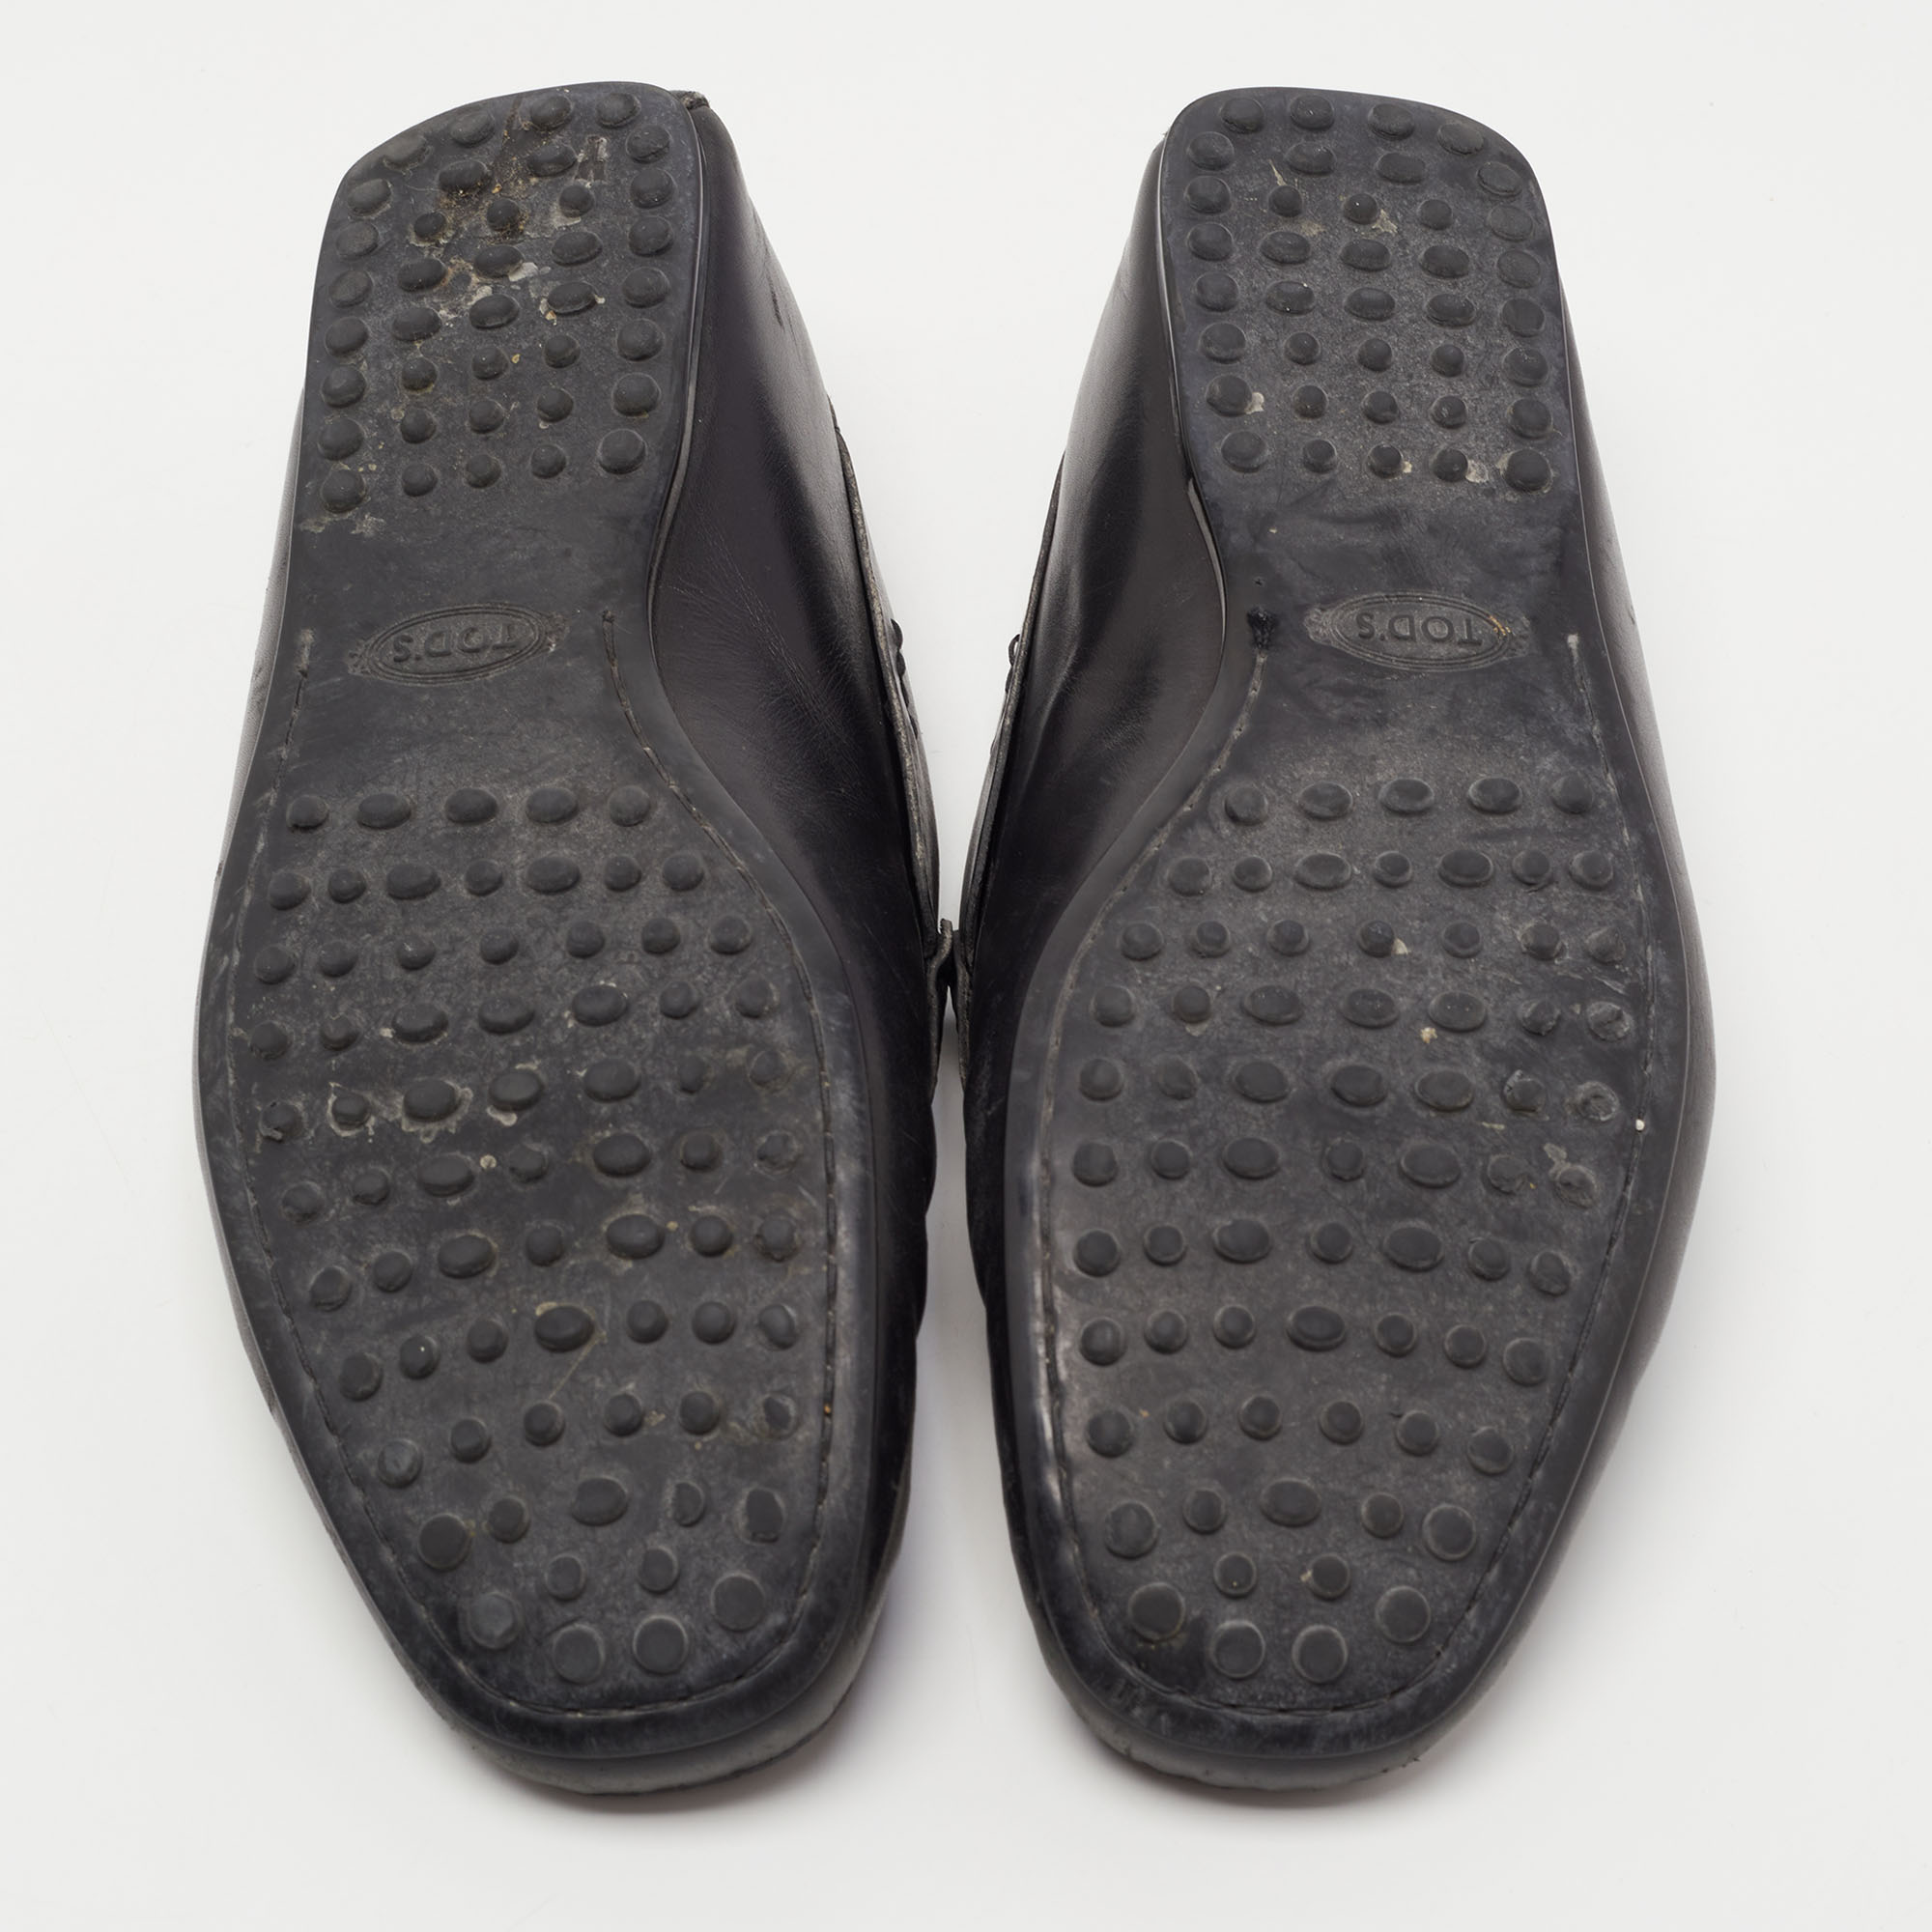 Tods Black Leather Gommino Driving Loafers Size 42